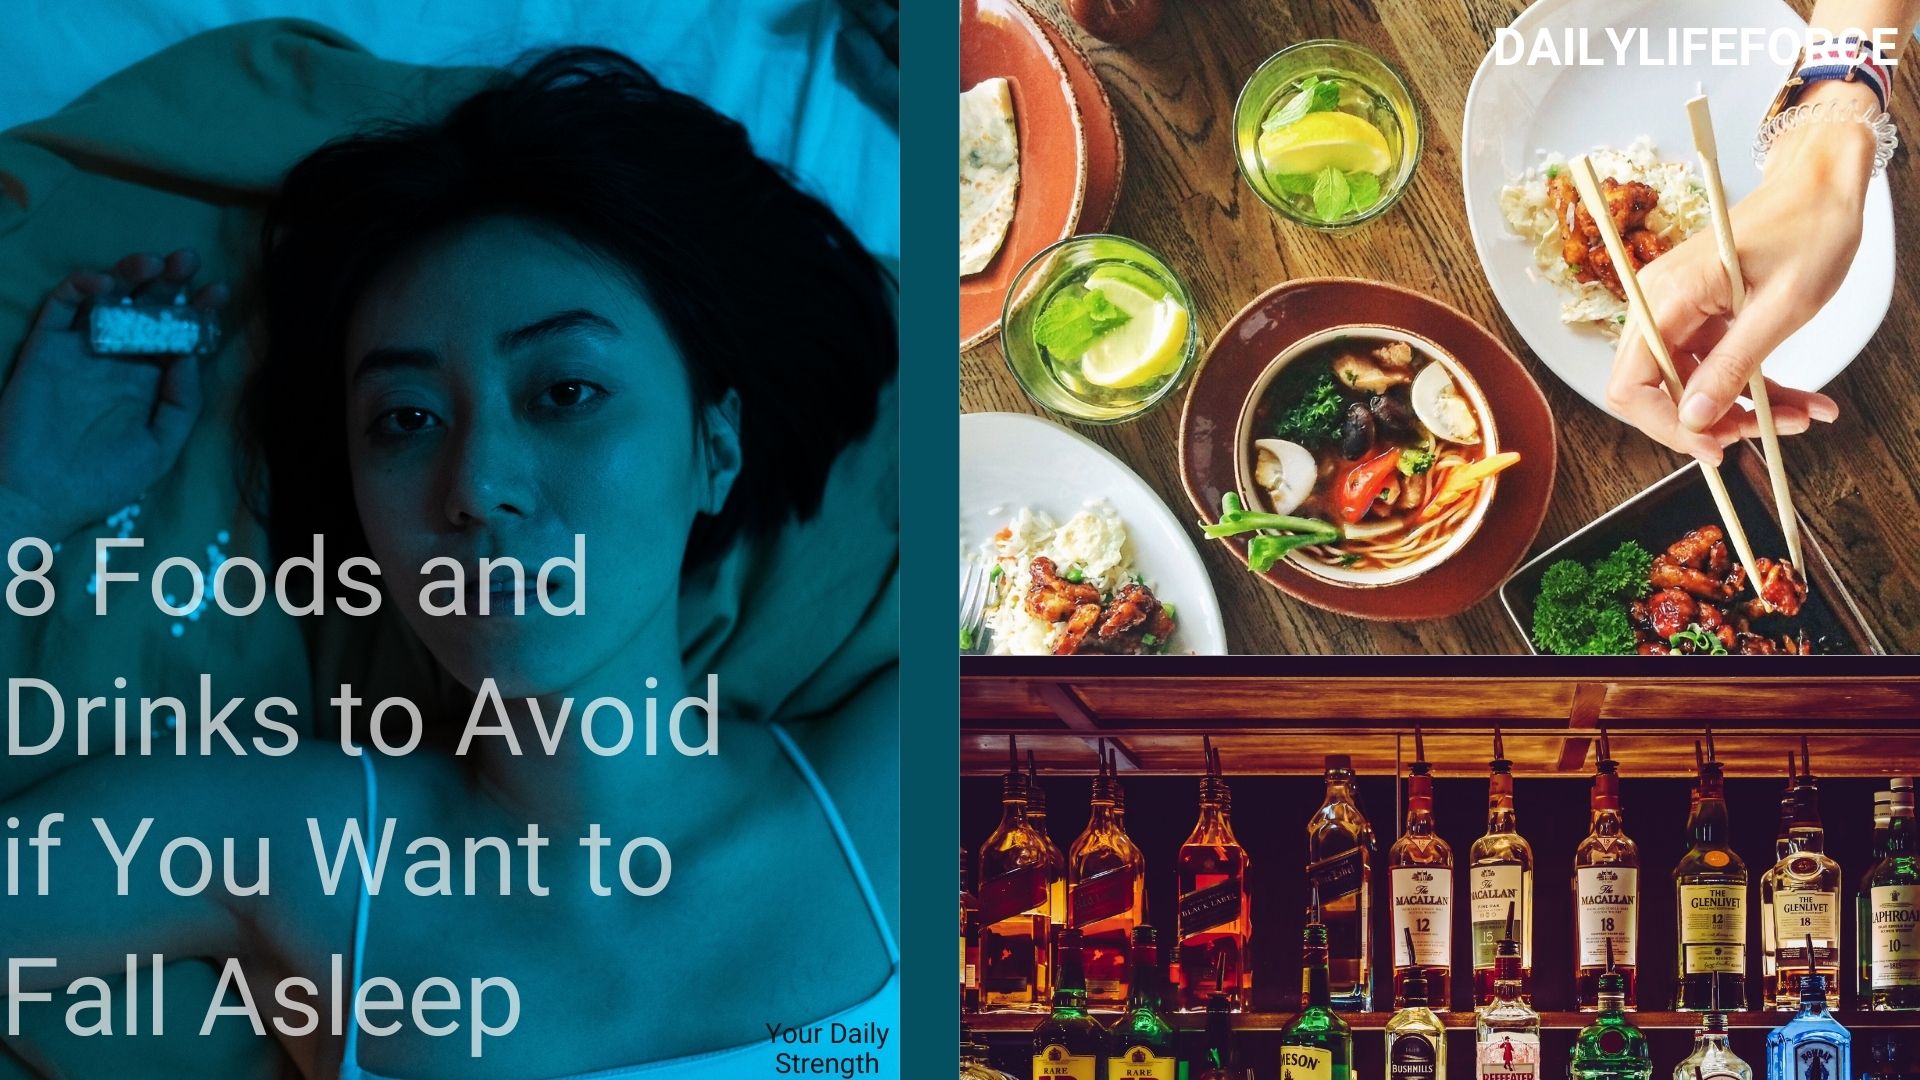 Foods and Drinks to Avoid if You Want to Fall Asleep